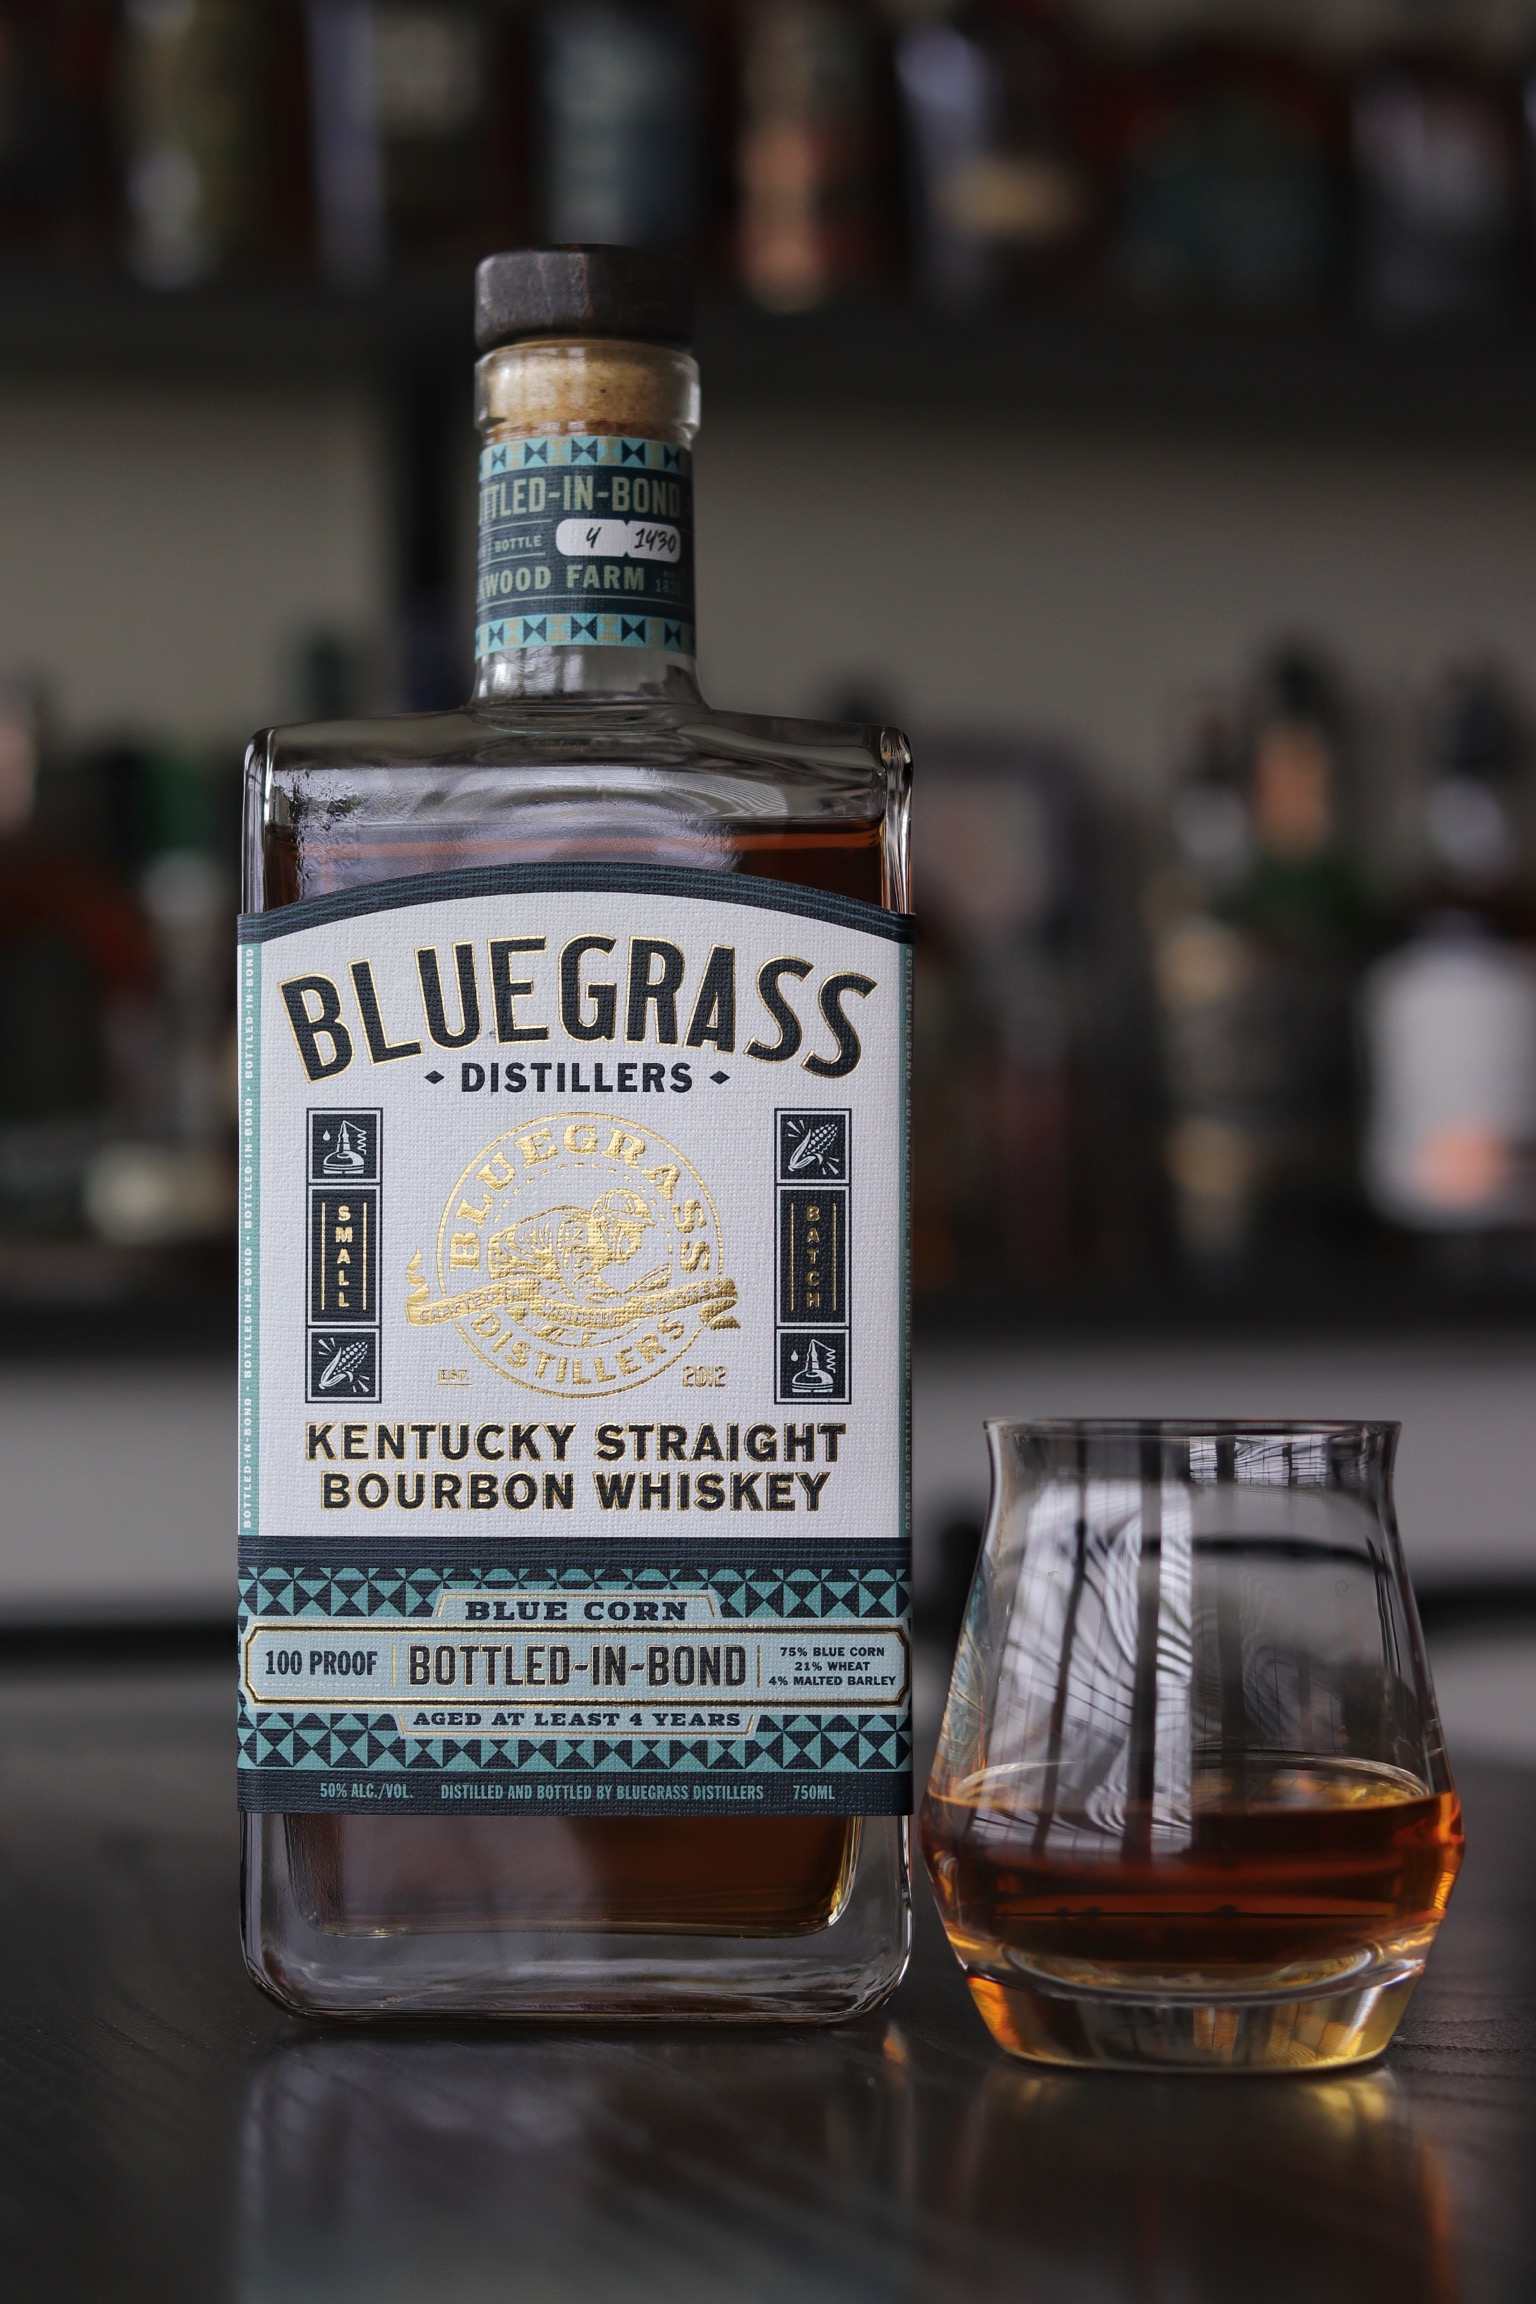 New Bottled-in-Bond Bourbon Made from Unique Blue Corn